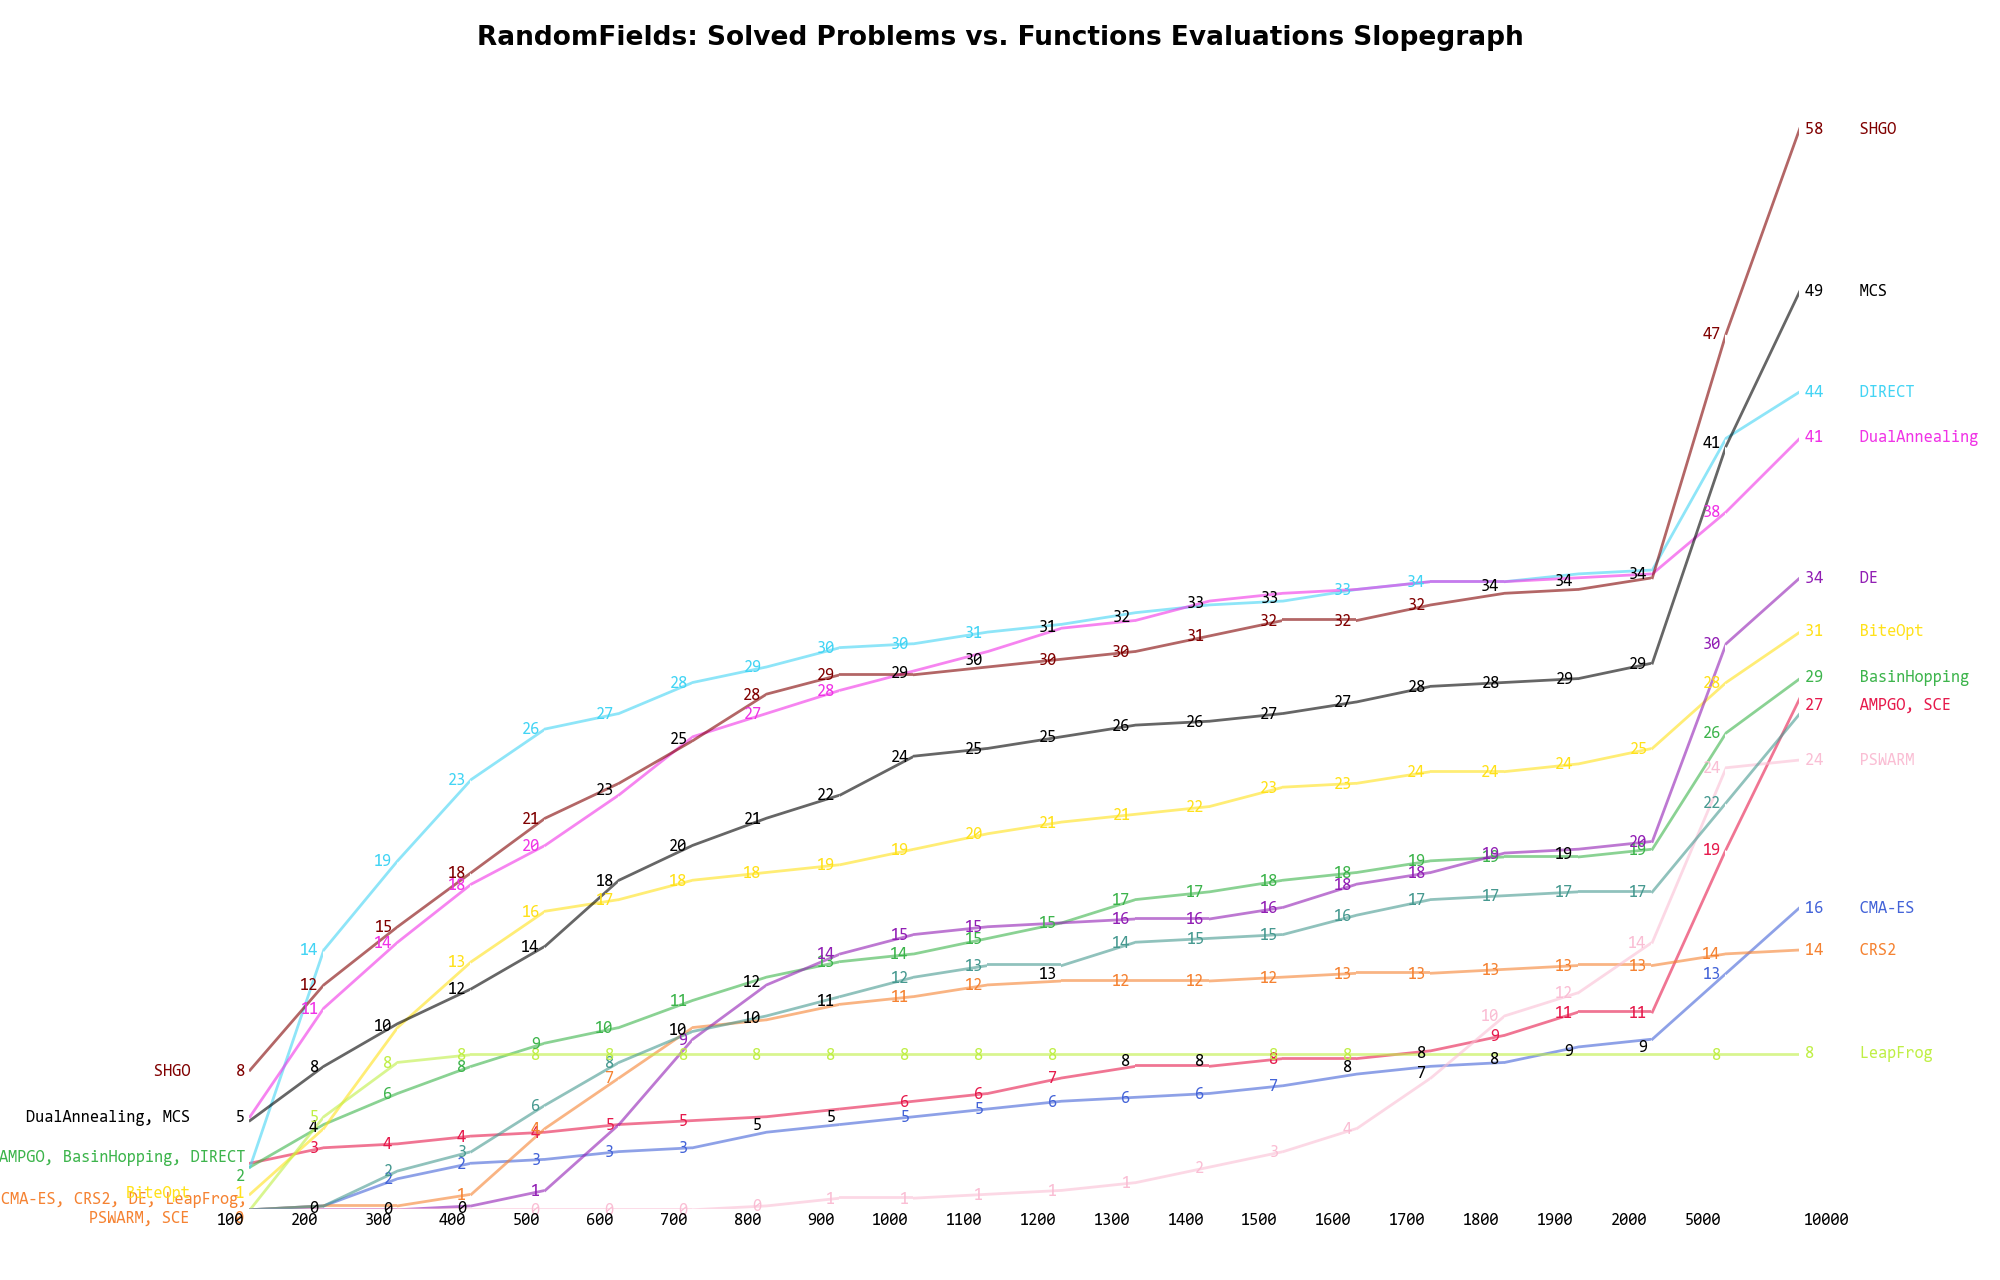 Percentage of problems solved given a fixed number of function evaluations on the RandomFields test suite